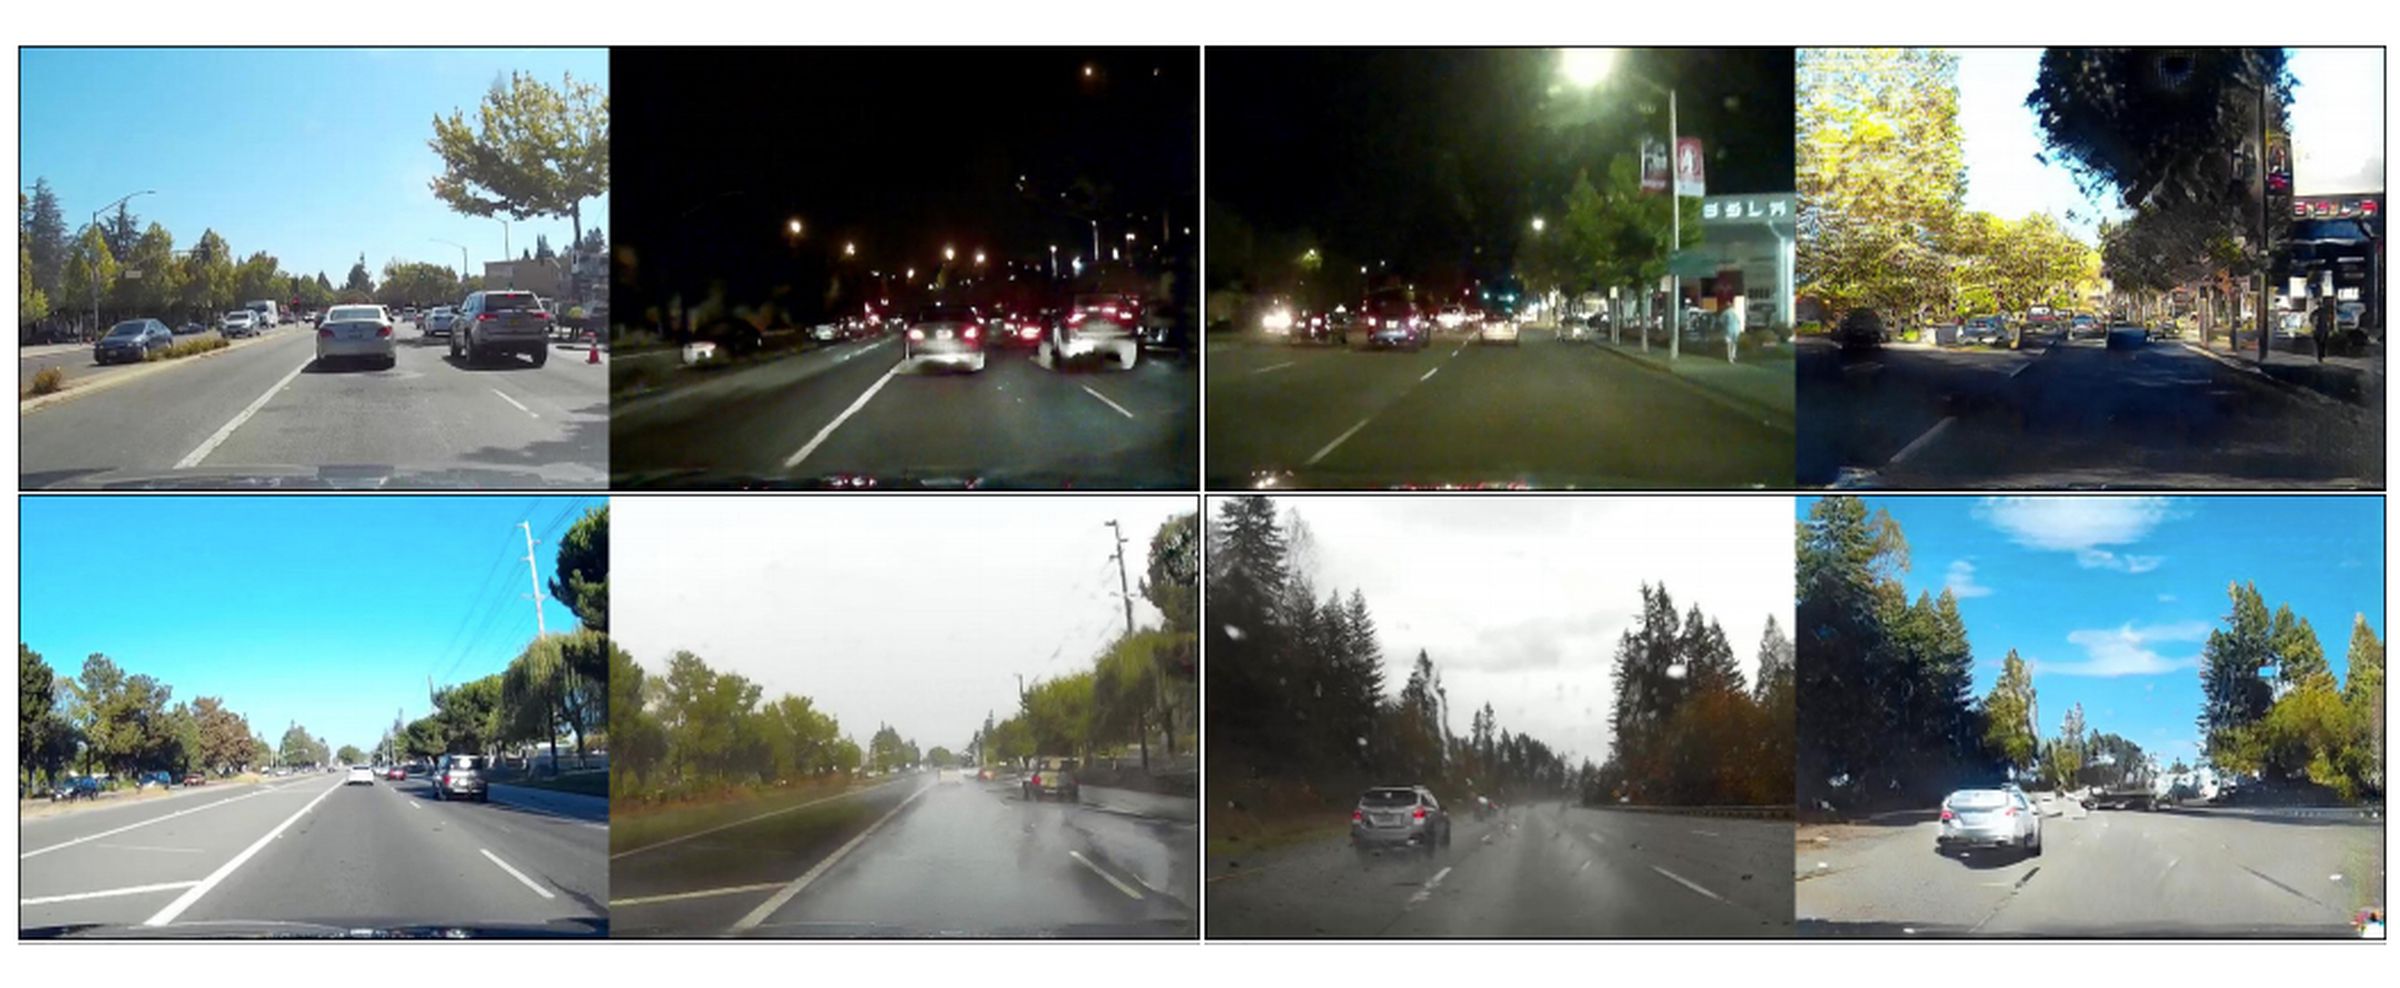 Some more examples of Nvidia’s AI program at work. In each pair, the input image is on the left, and the generate image on the right. 